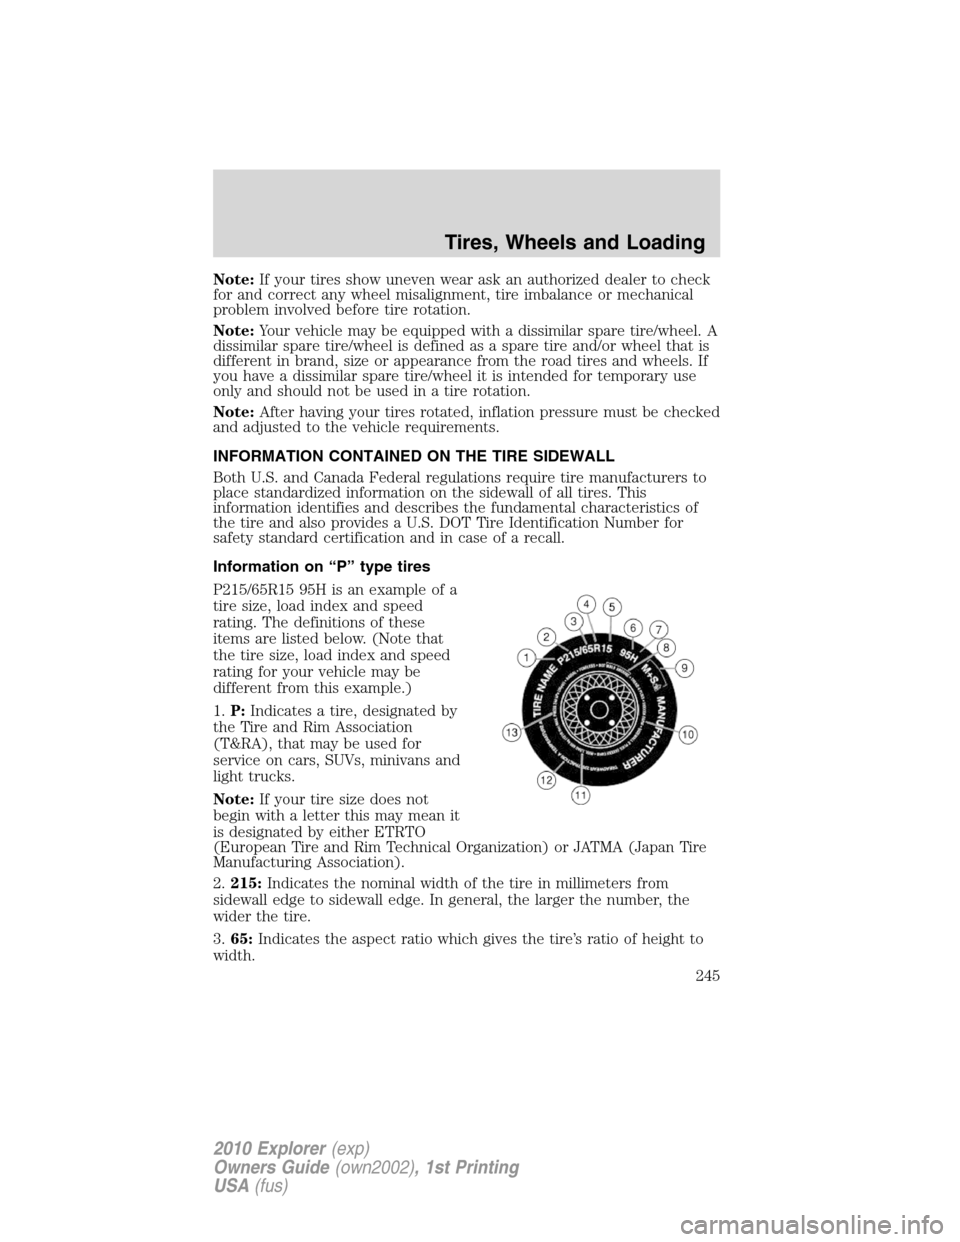 FORD EXPLORER 2010 4.G Owners Manual Note:If your tires show uneven wear ask an authorized dealer to check
for and correct any wheel misalignment, tire imbalance or mechanical
problem involved before tire rotation.
Note:Your vehicle may 